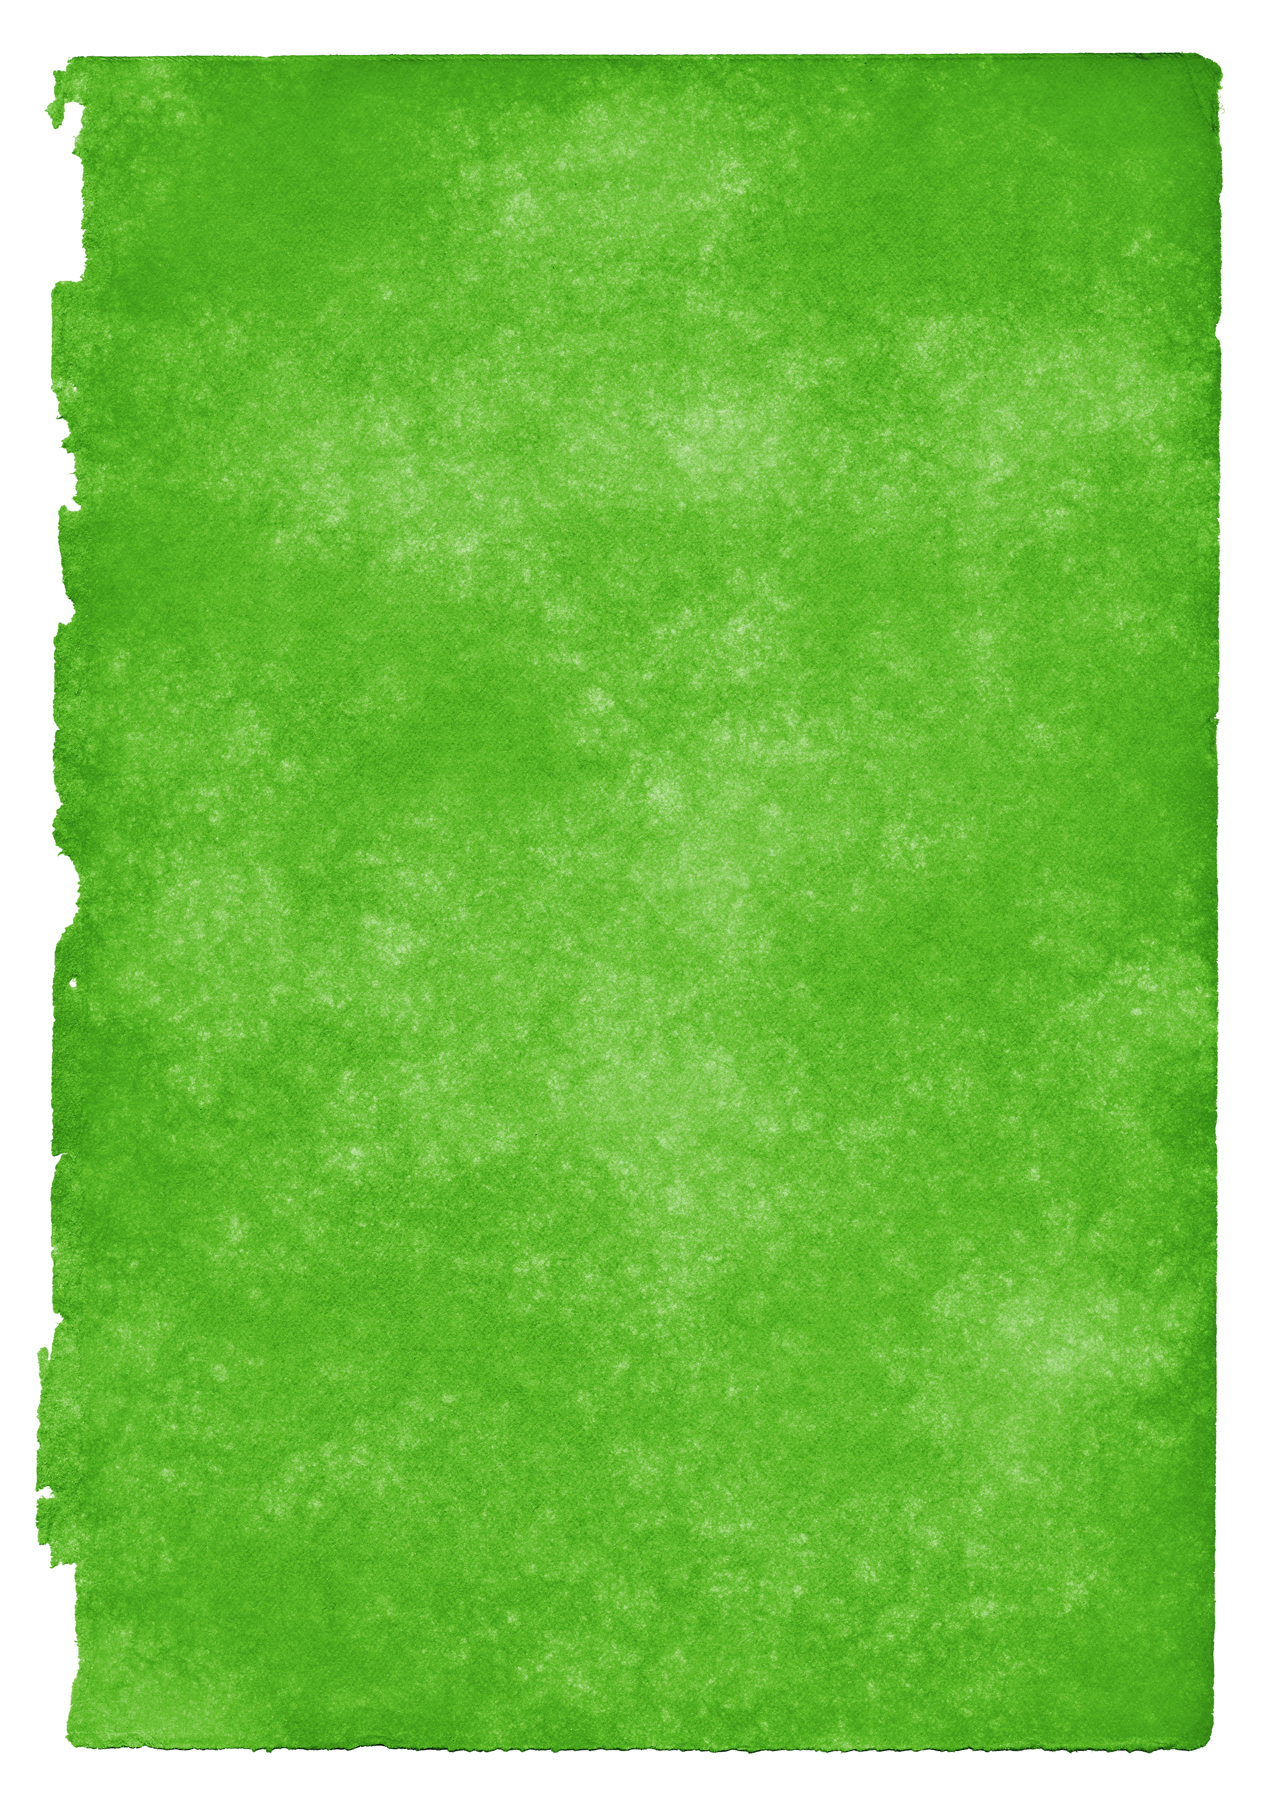 Vintage Grunge Paper - Green, Age, Picture, Retro, Resource, HQ Photo